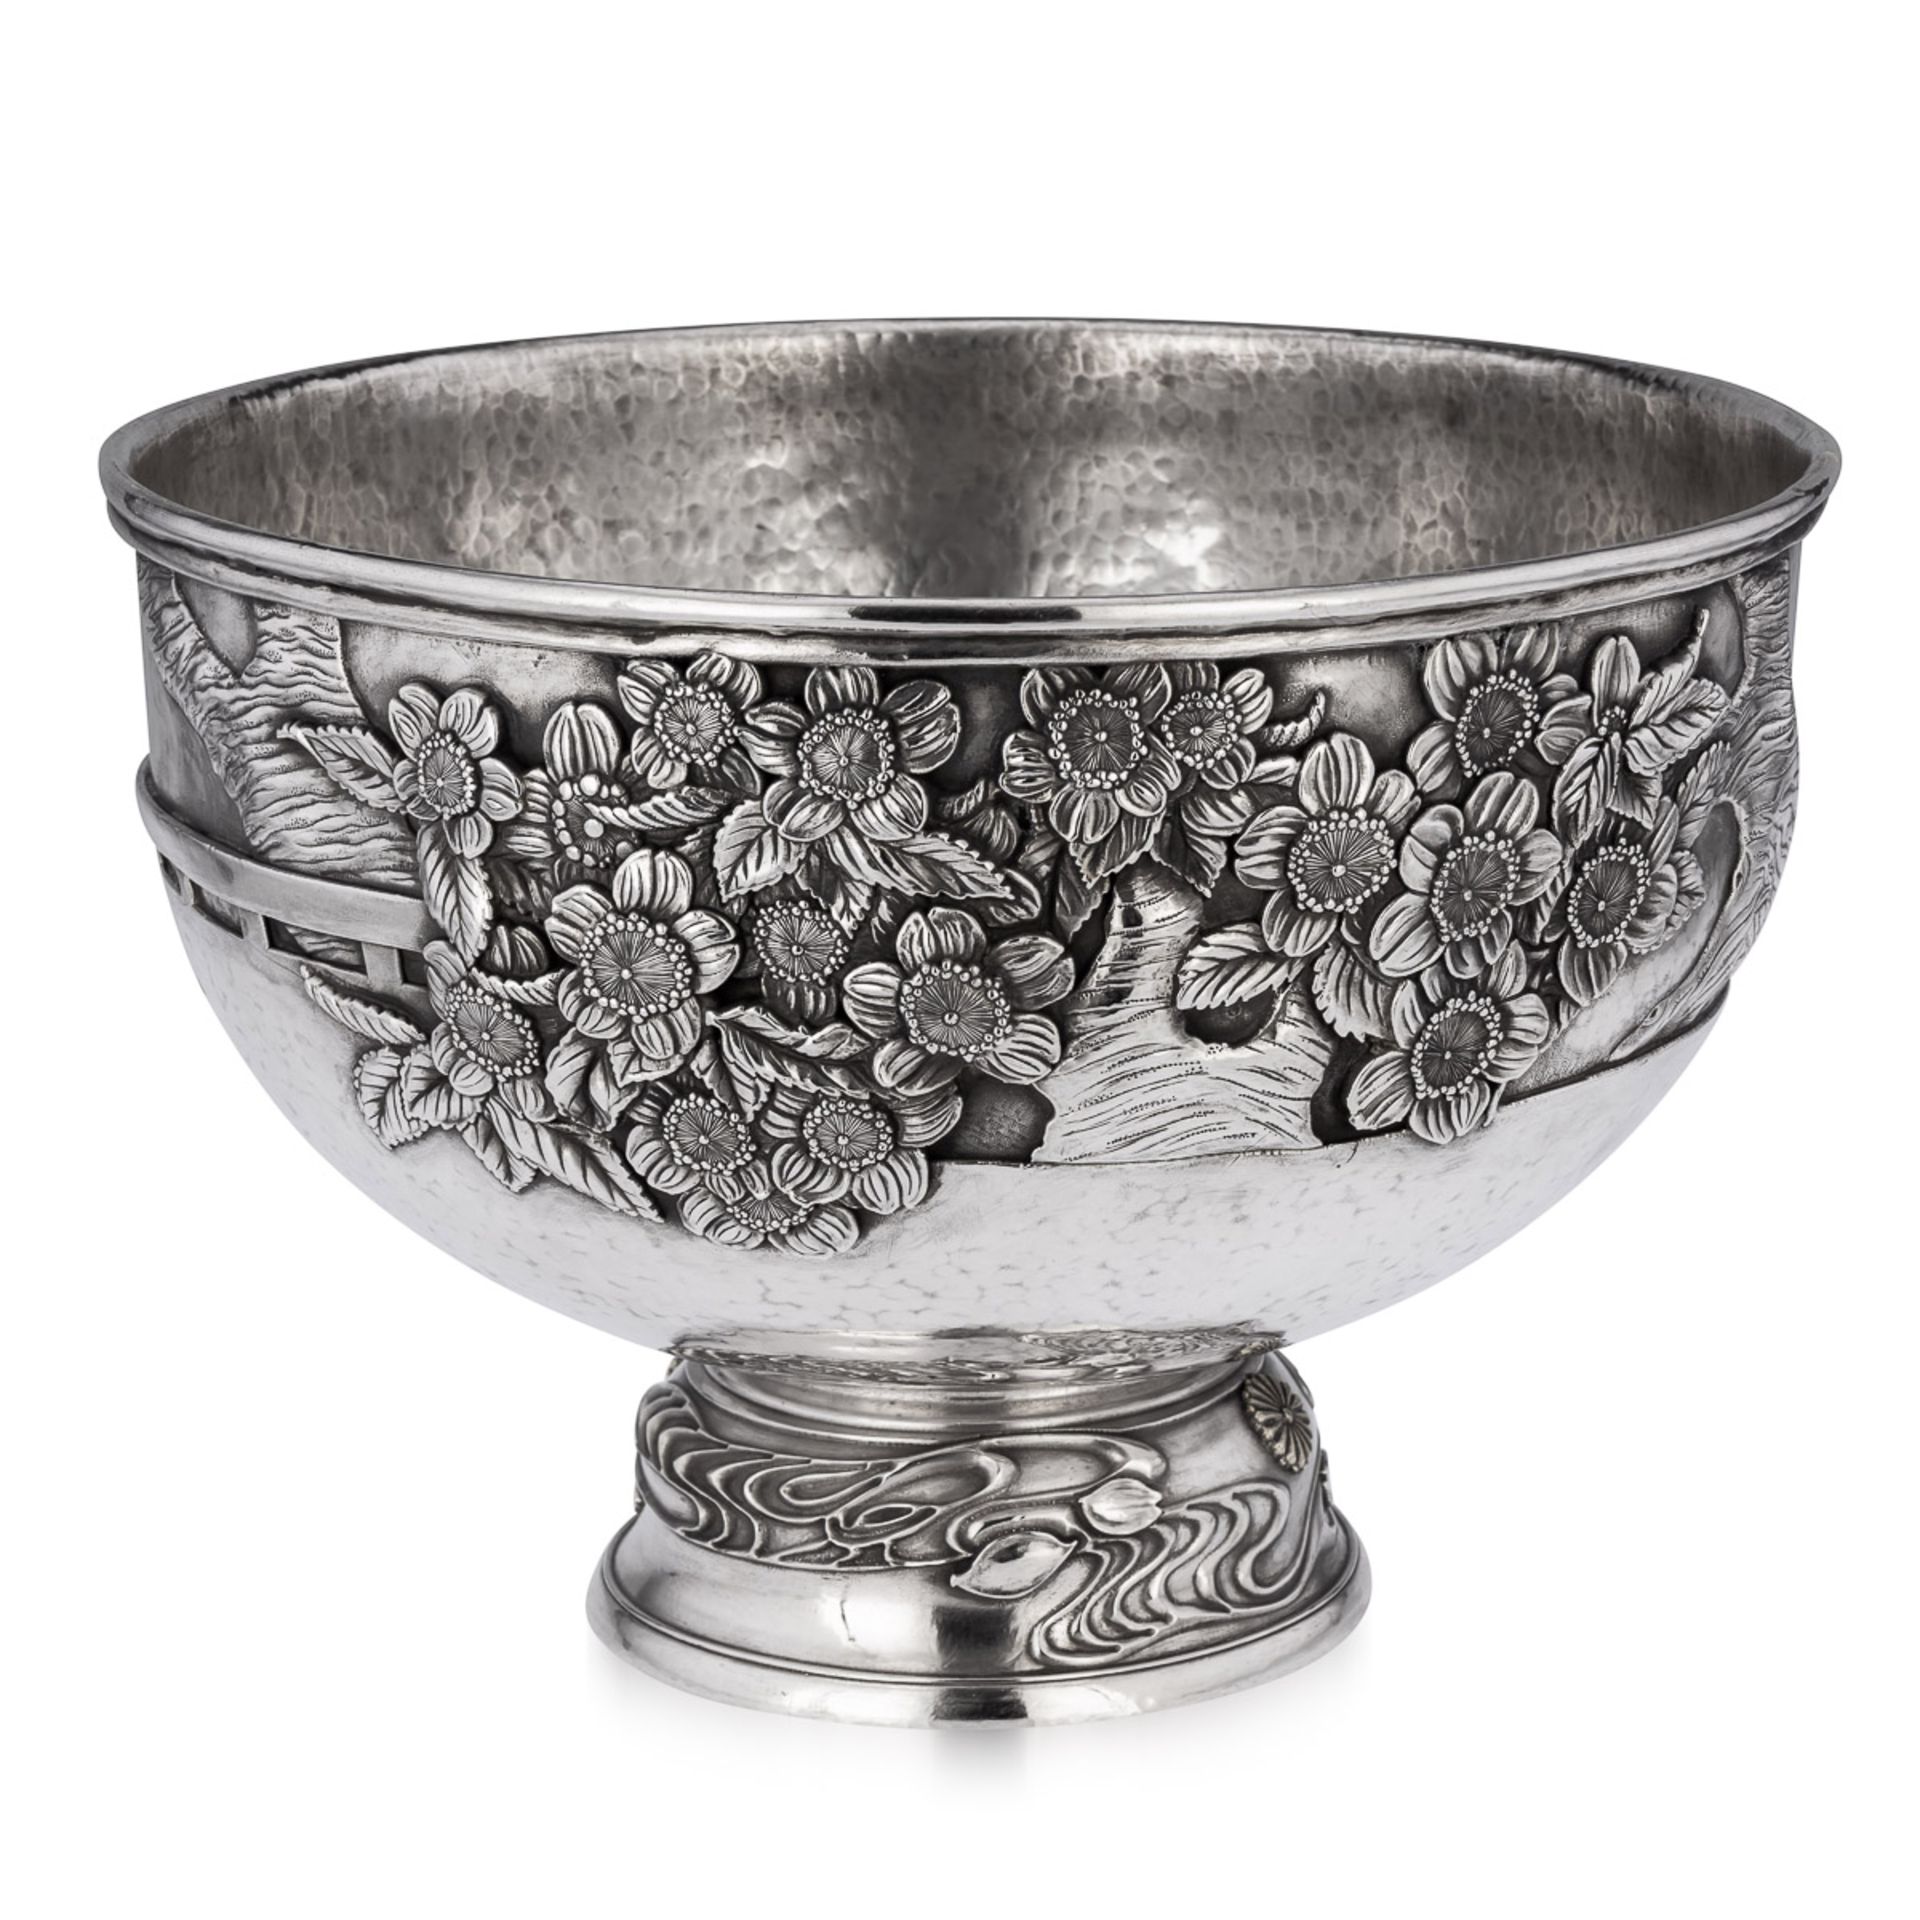 A MONUMENTAL LATE 19TH CENTURY JAPANESE SOLID SILVER BOWL C. 1900